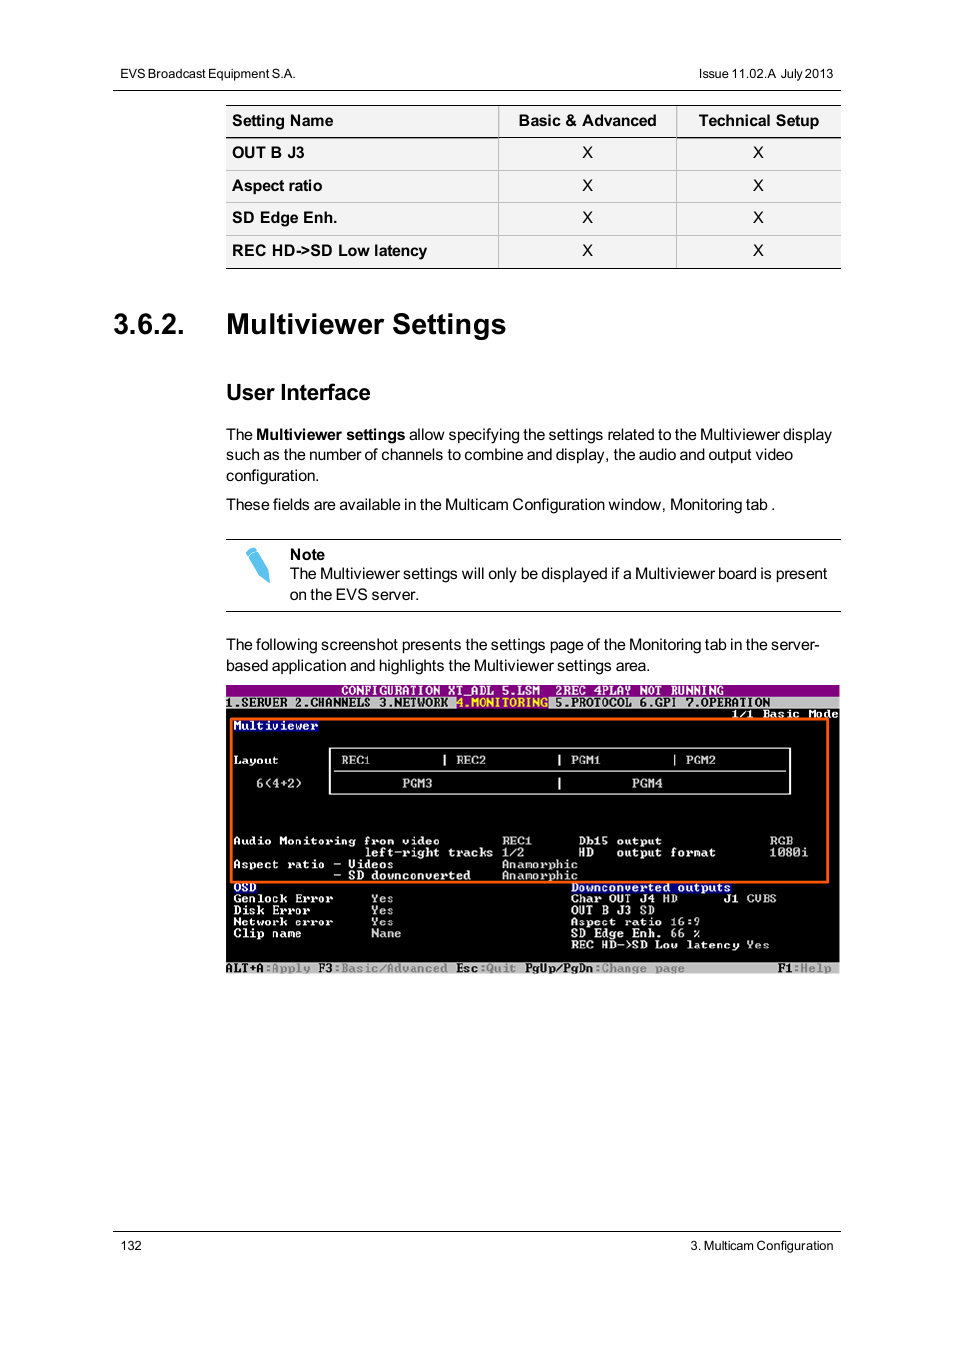 Multiviewer settings, User interface | EVS XT2 Version 11.02 - July 2013  Configuration Manual User Manual | Page 140 / 220